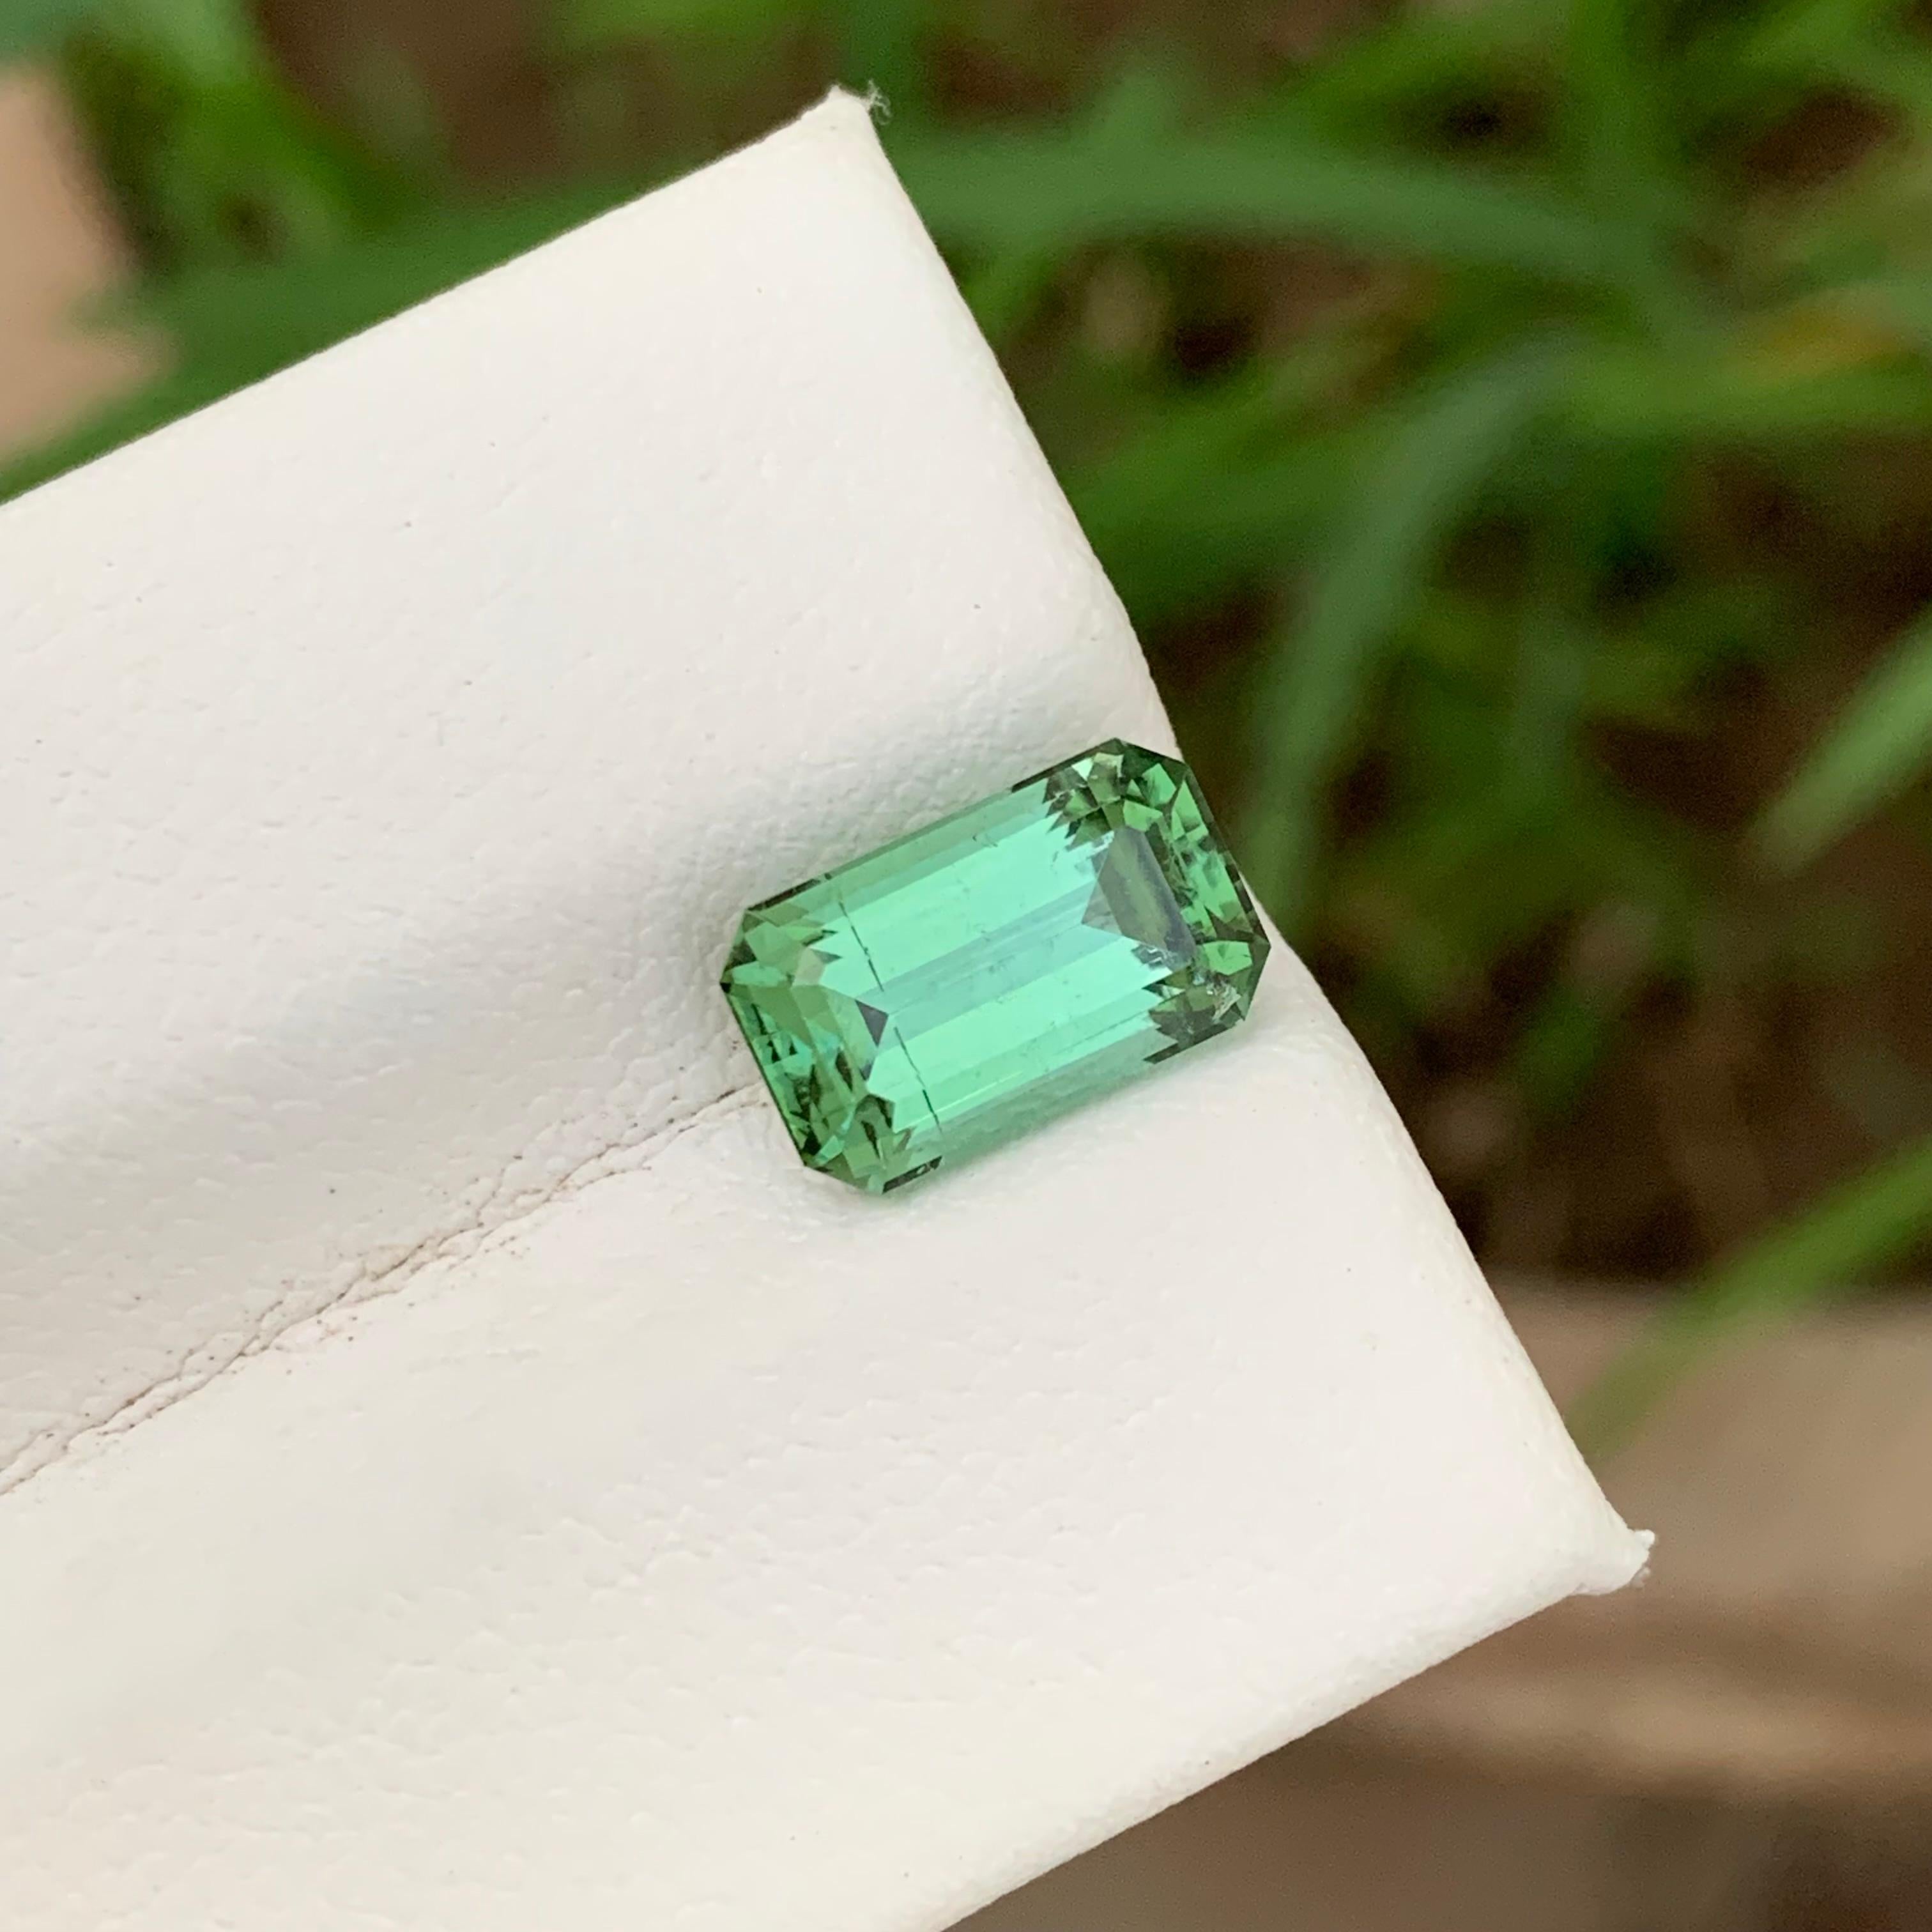 Loose Tourmaline 
Weight: 3.05 Carats 
Dimension: 10.3x6.3x5.4 Mm
Origin: Kunar Afghanistan
Shape: Emerald 
Color: Green 
Treatment: Non
Certificate: On Customer Demand 
Tourmaline is a fascinating gemstone known for its remarkable diversity in